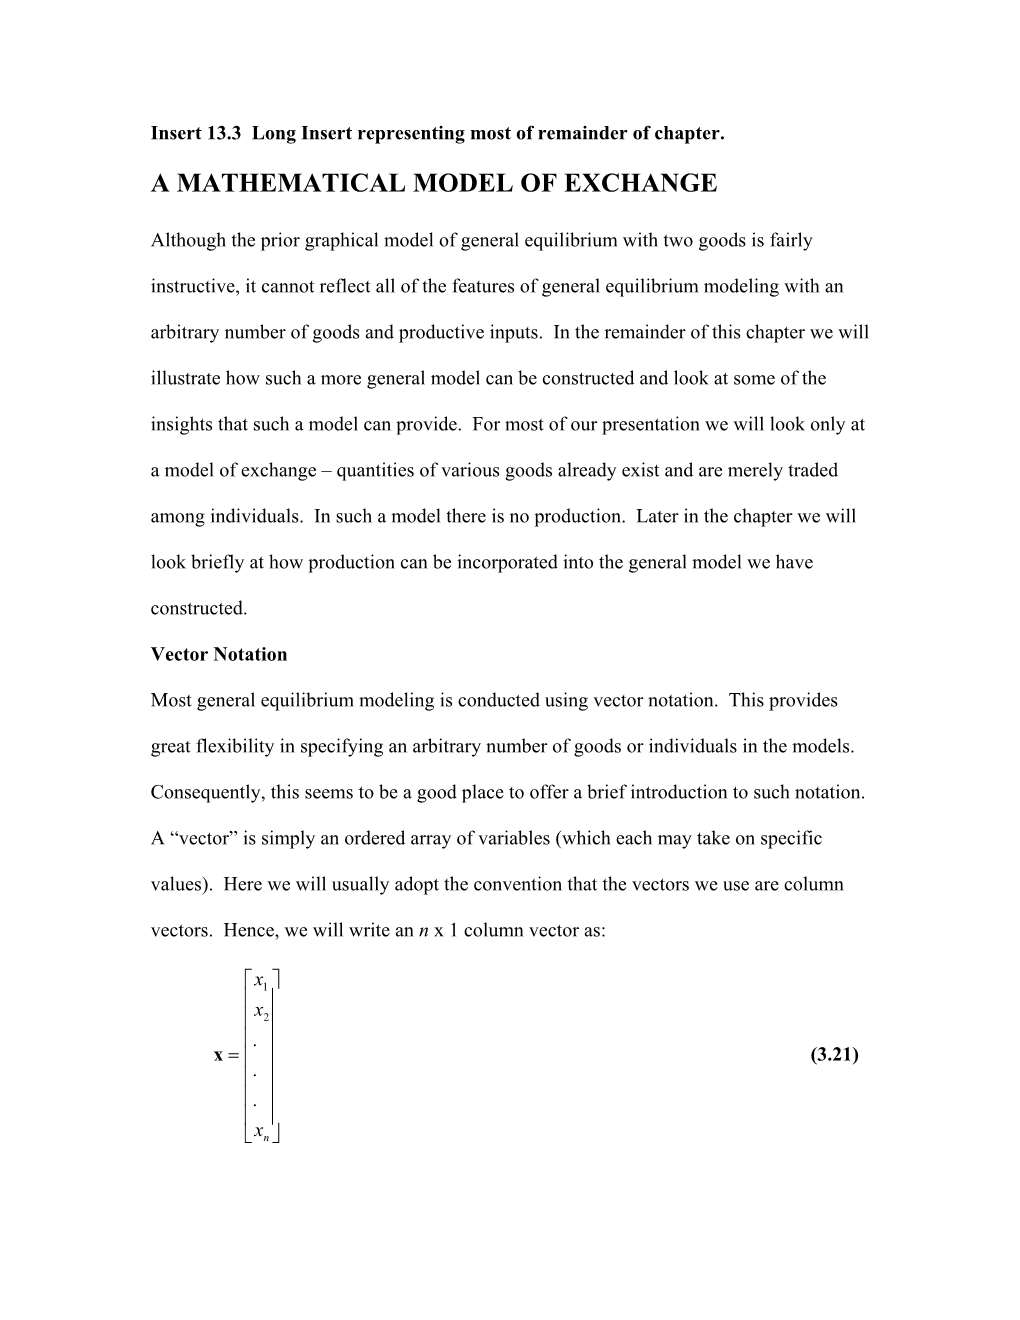 A Mathematical Model of Exchange